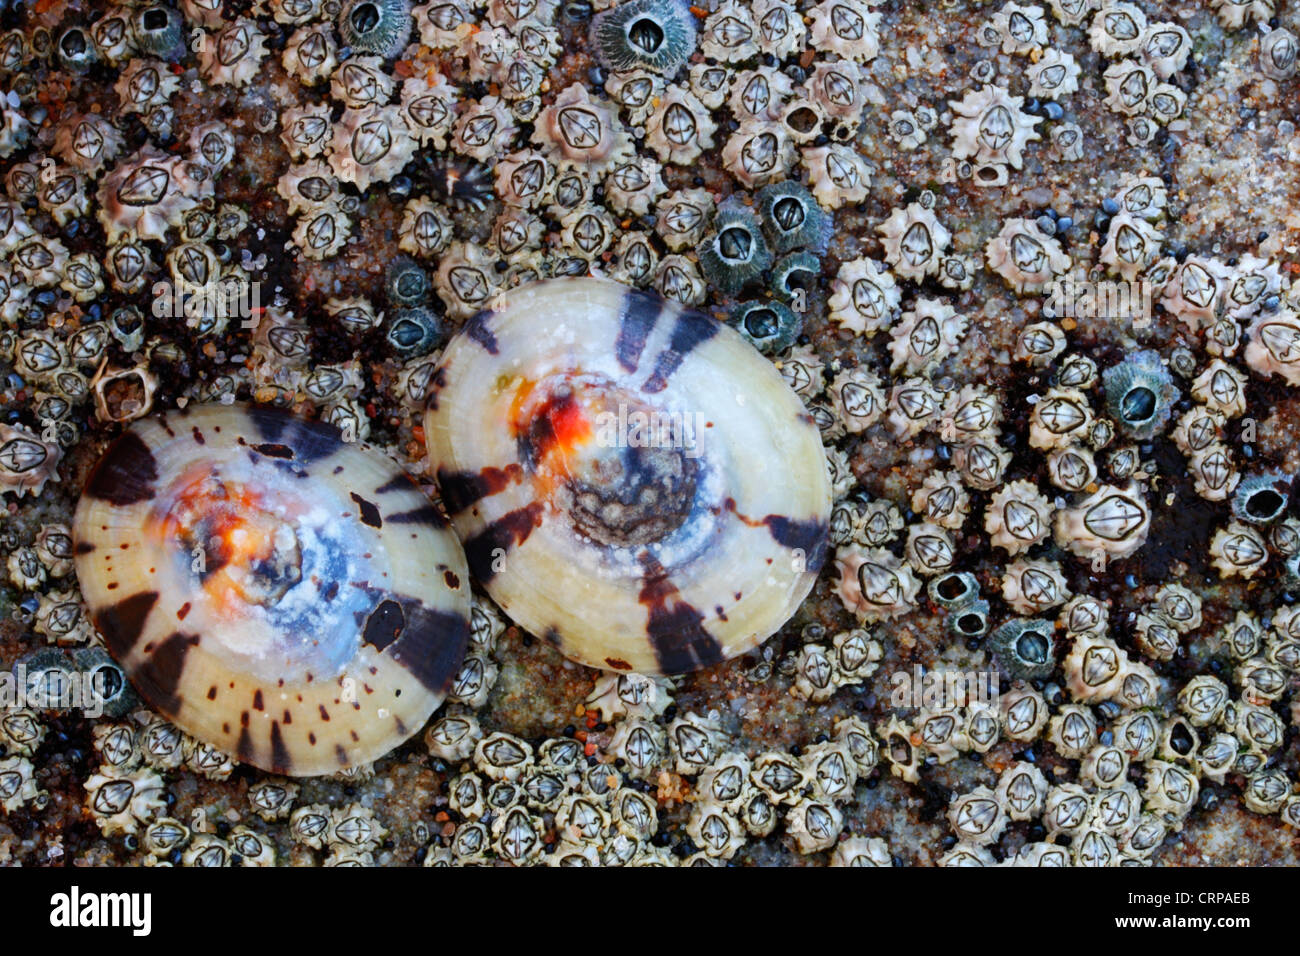 Lustrous limpets (Cellana capensis) and Toothed barnacles (Chthamalus dentatus) attached to rock in an intertidal zone Stock Photo